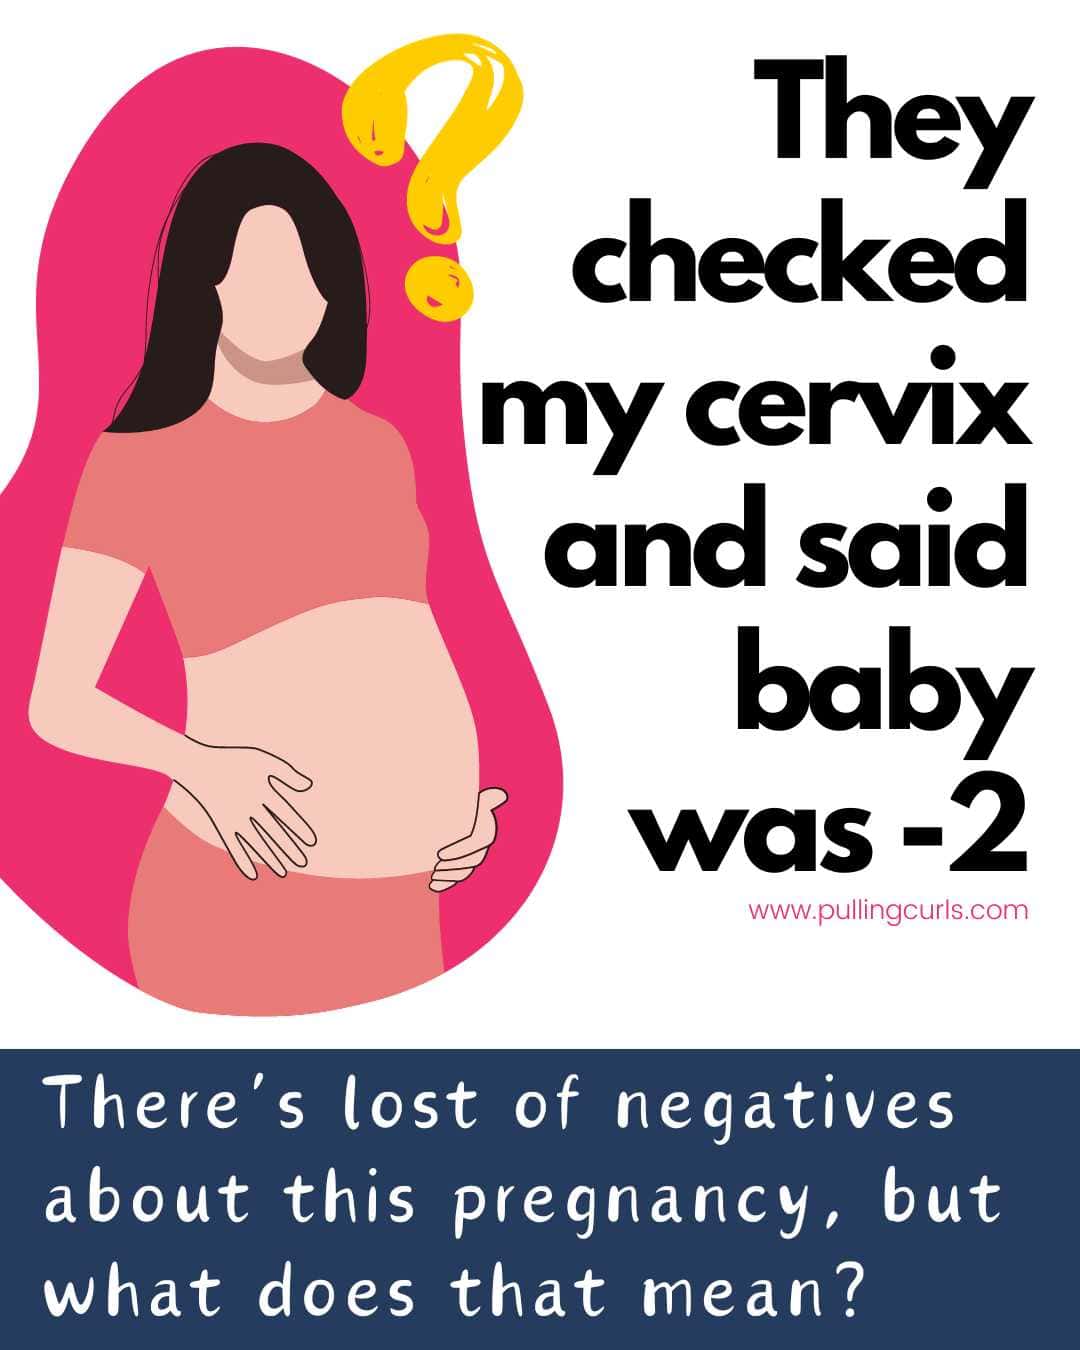 pregnant woman, question mark / they checked my cervix and said baby was -2 / there are a lot of negatives about this pregnancy but what does that mean? via @pullingcurls